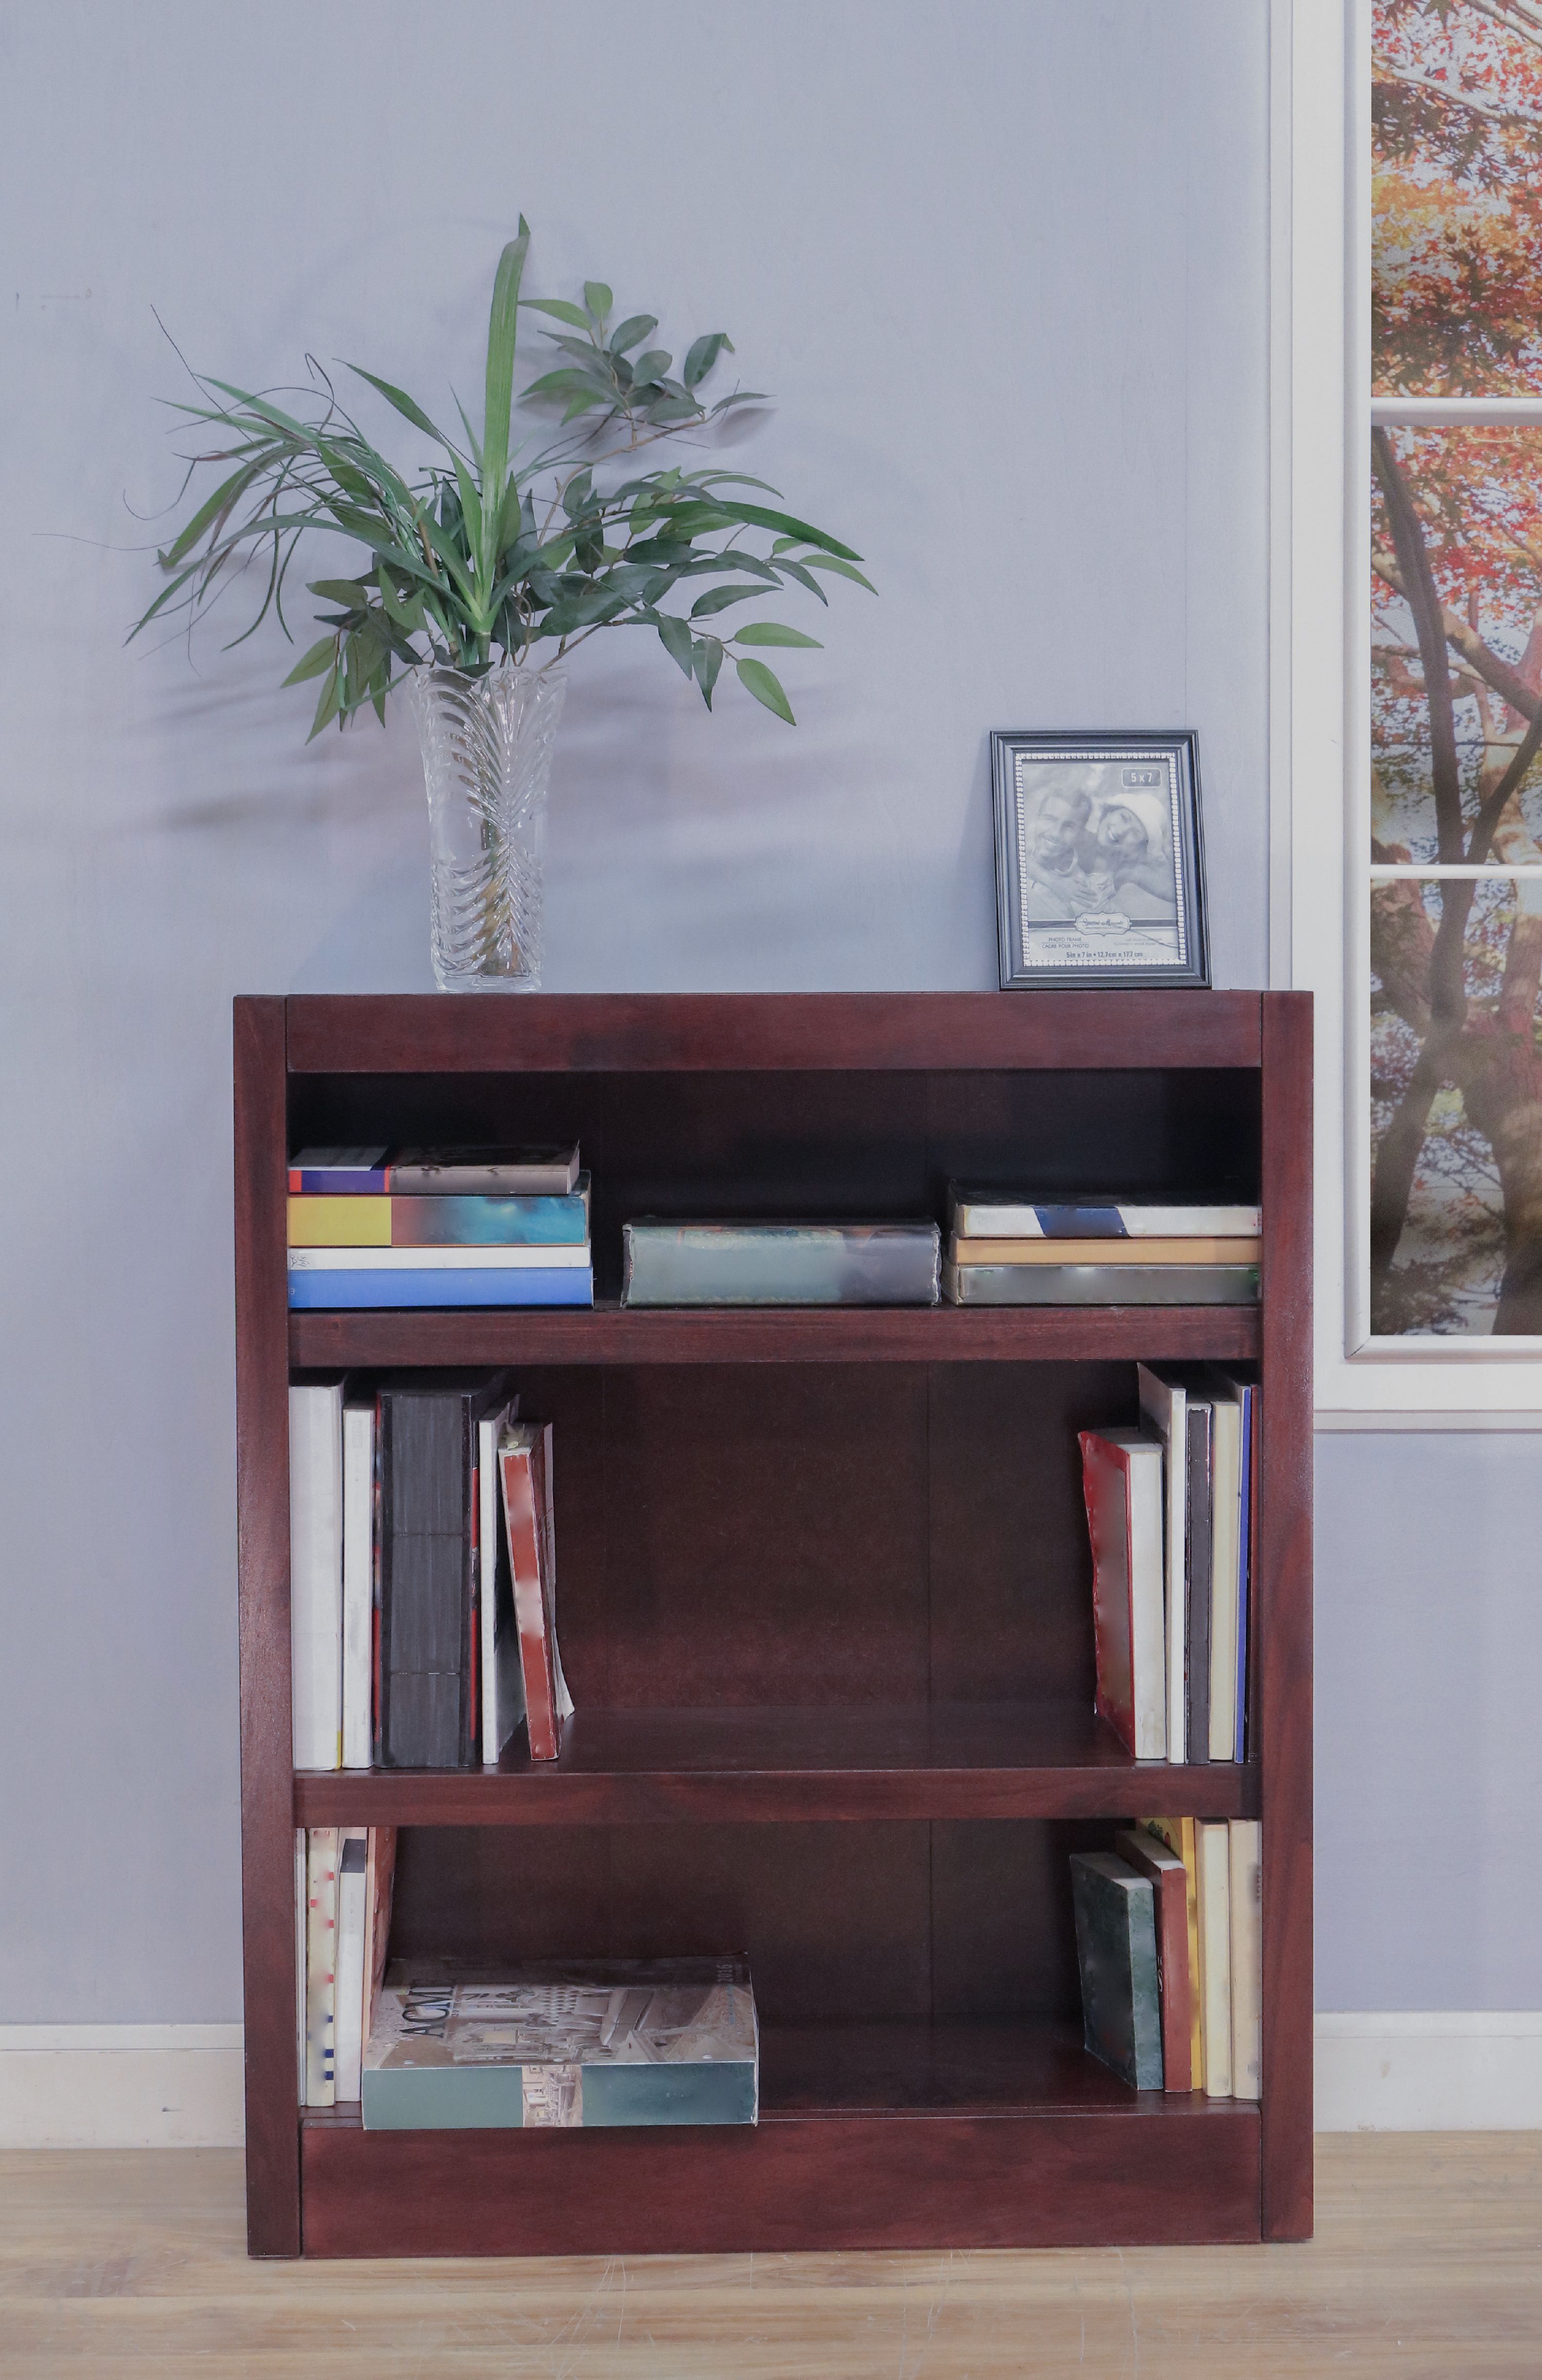 Concepts in Wood 3 Shelf Wood Bookcase, 36 inch Tall - Cherry Finish - image 2 of 6